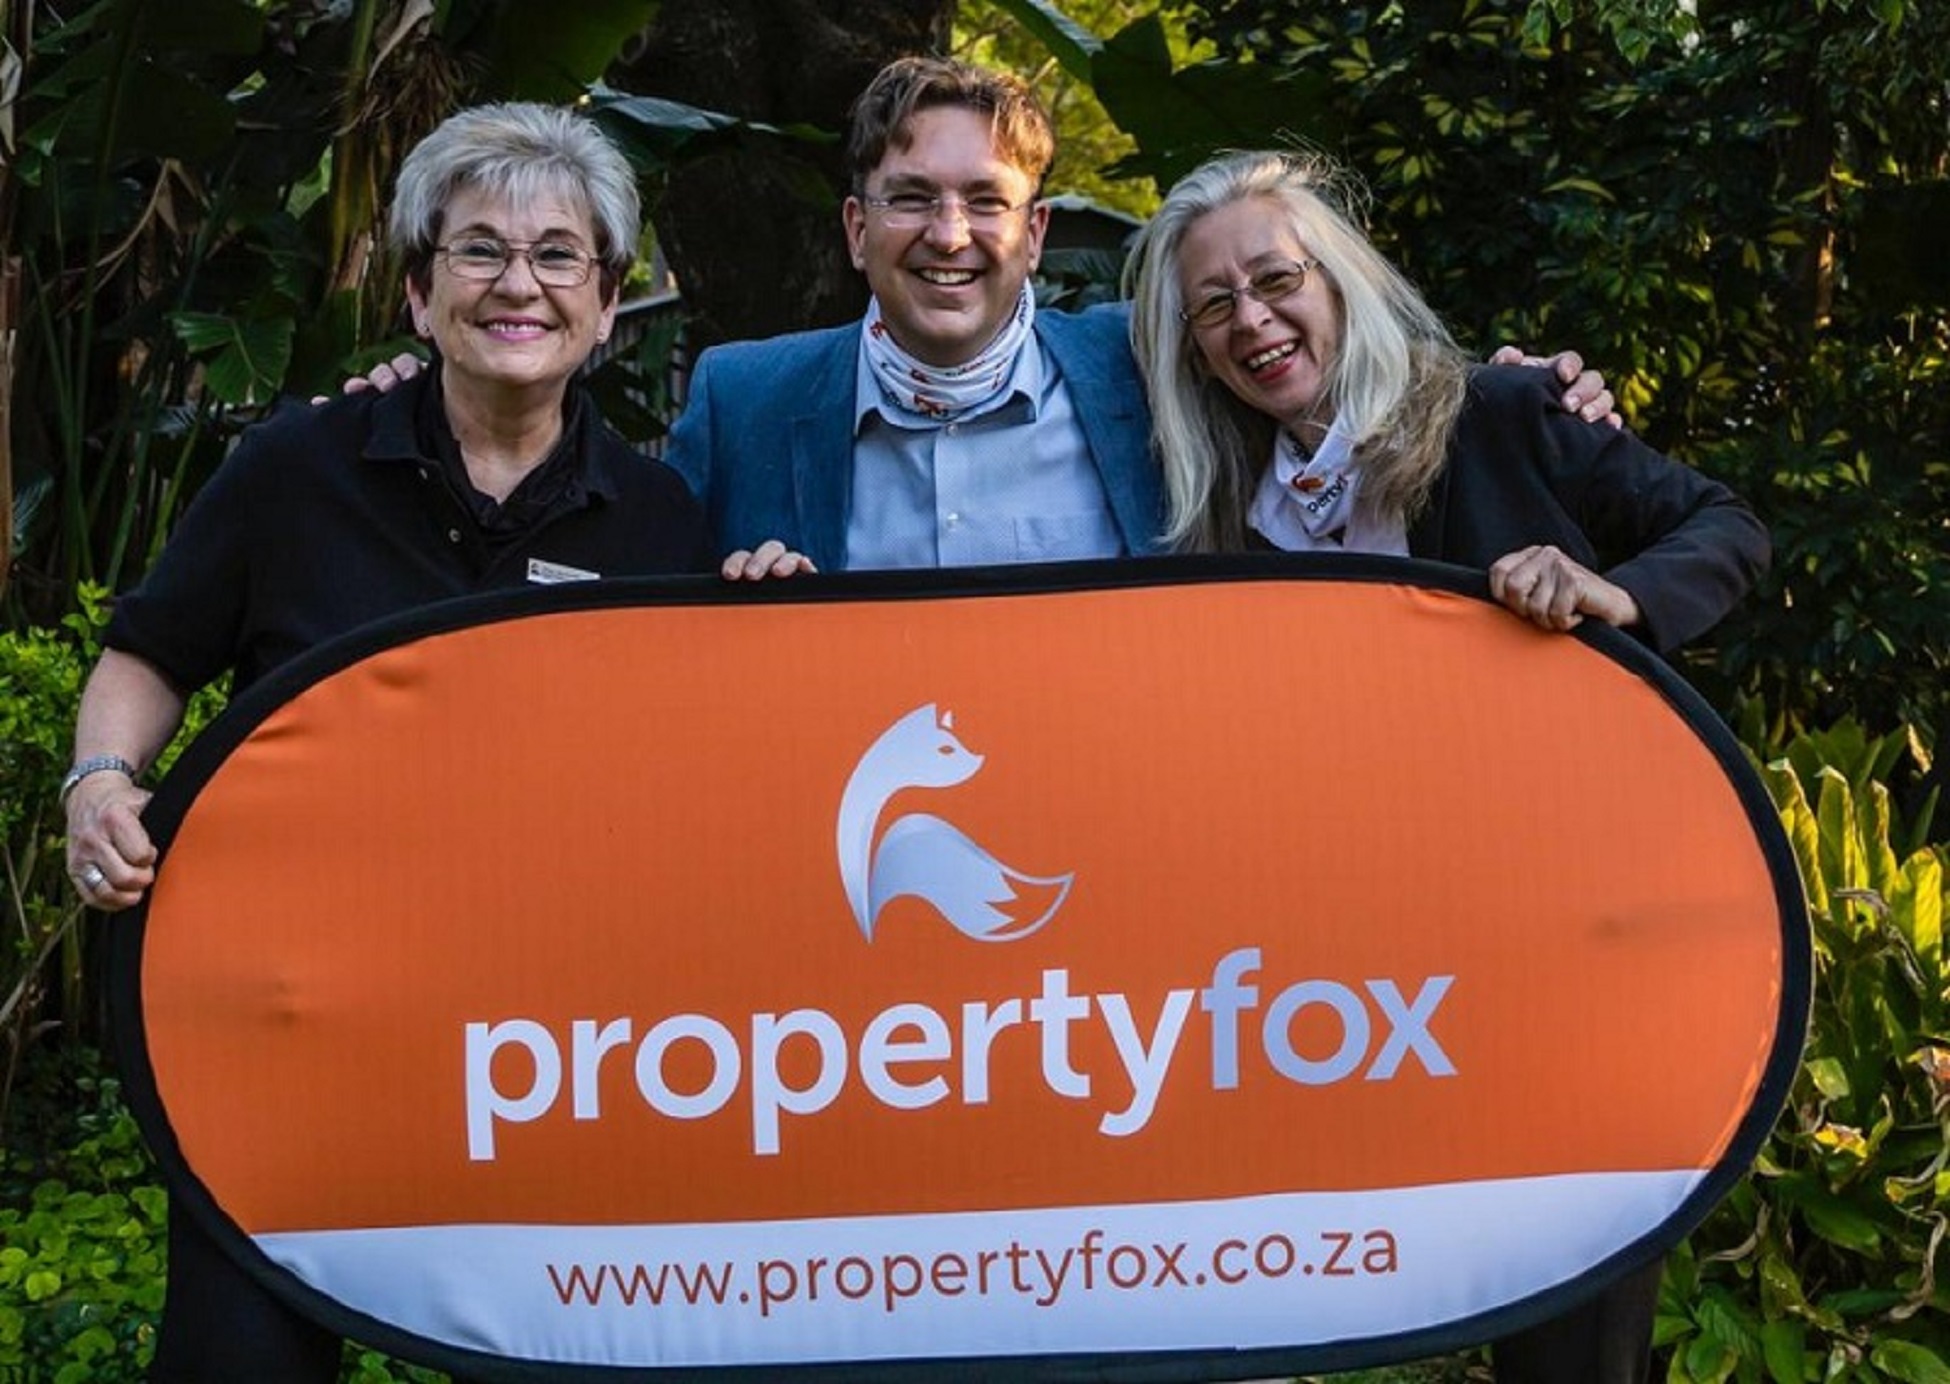 Better Selling Your Property with PropertyFox in Moot